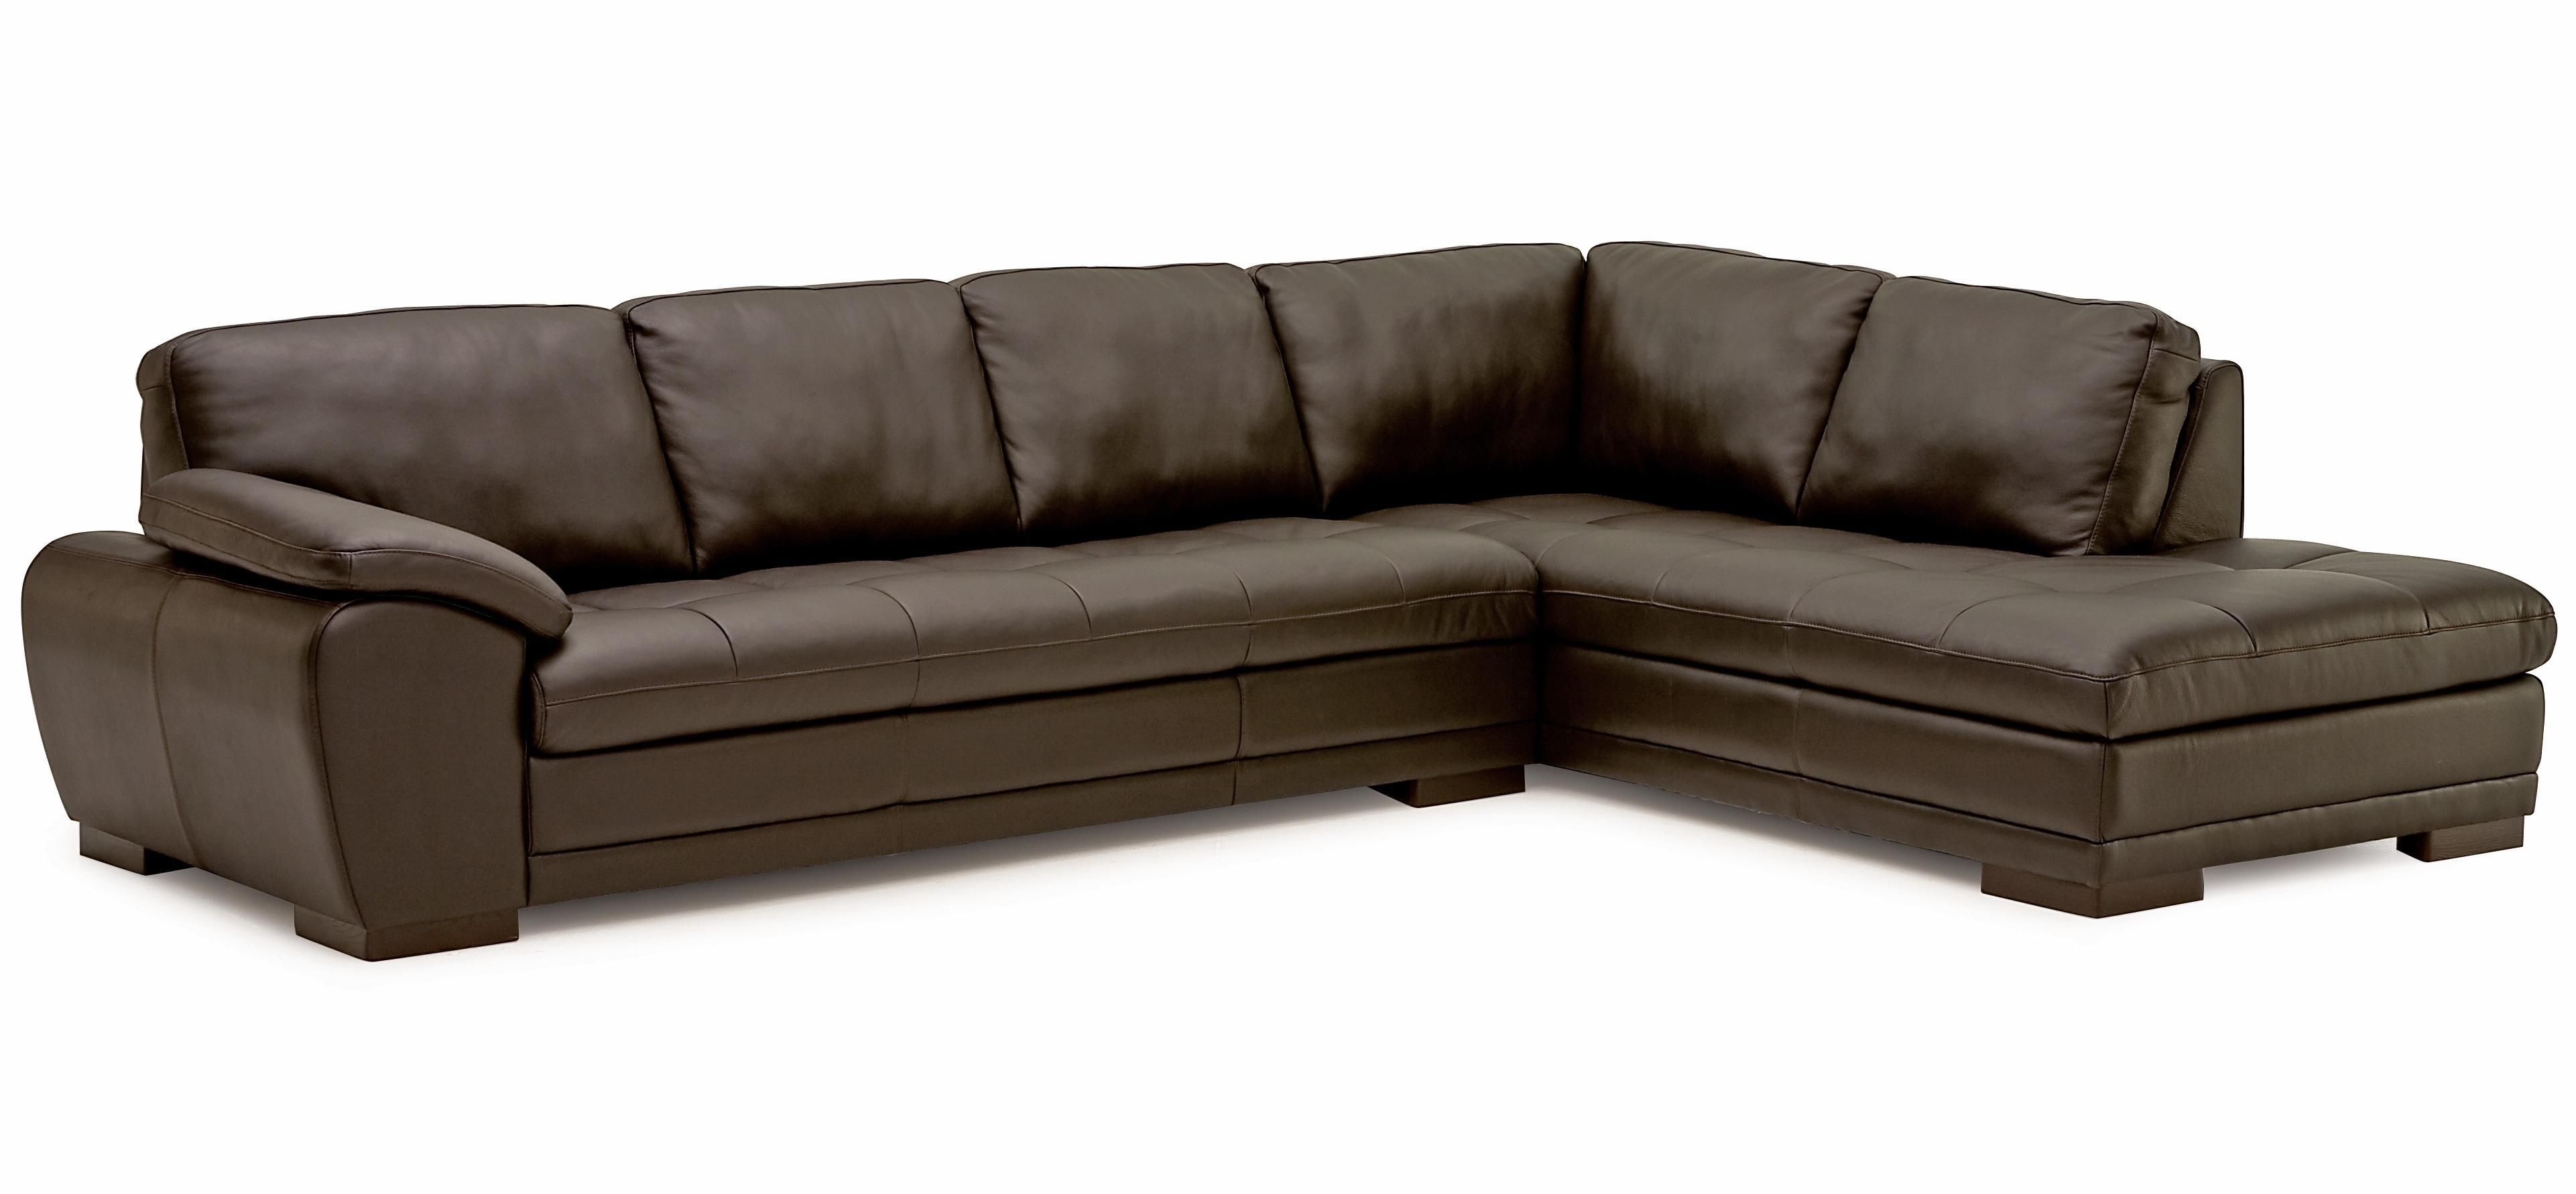 Fascinating Palliser Miami Contemporary Piece Sectional Sofa With Throughout Miami Sectional Sofas (Photo 3 of 10)